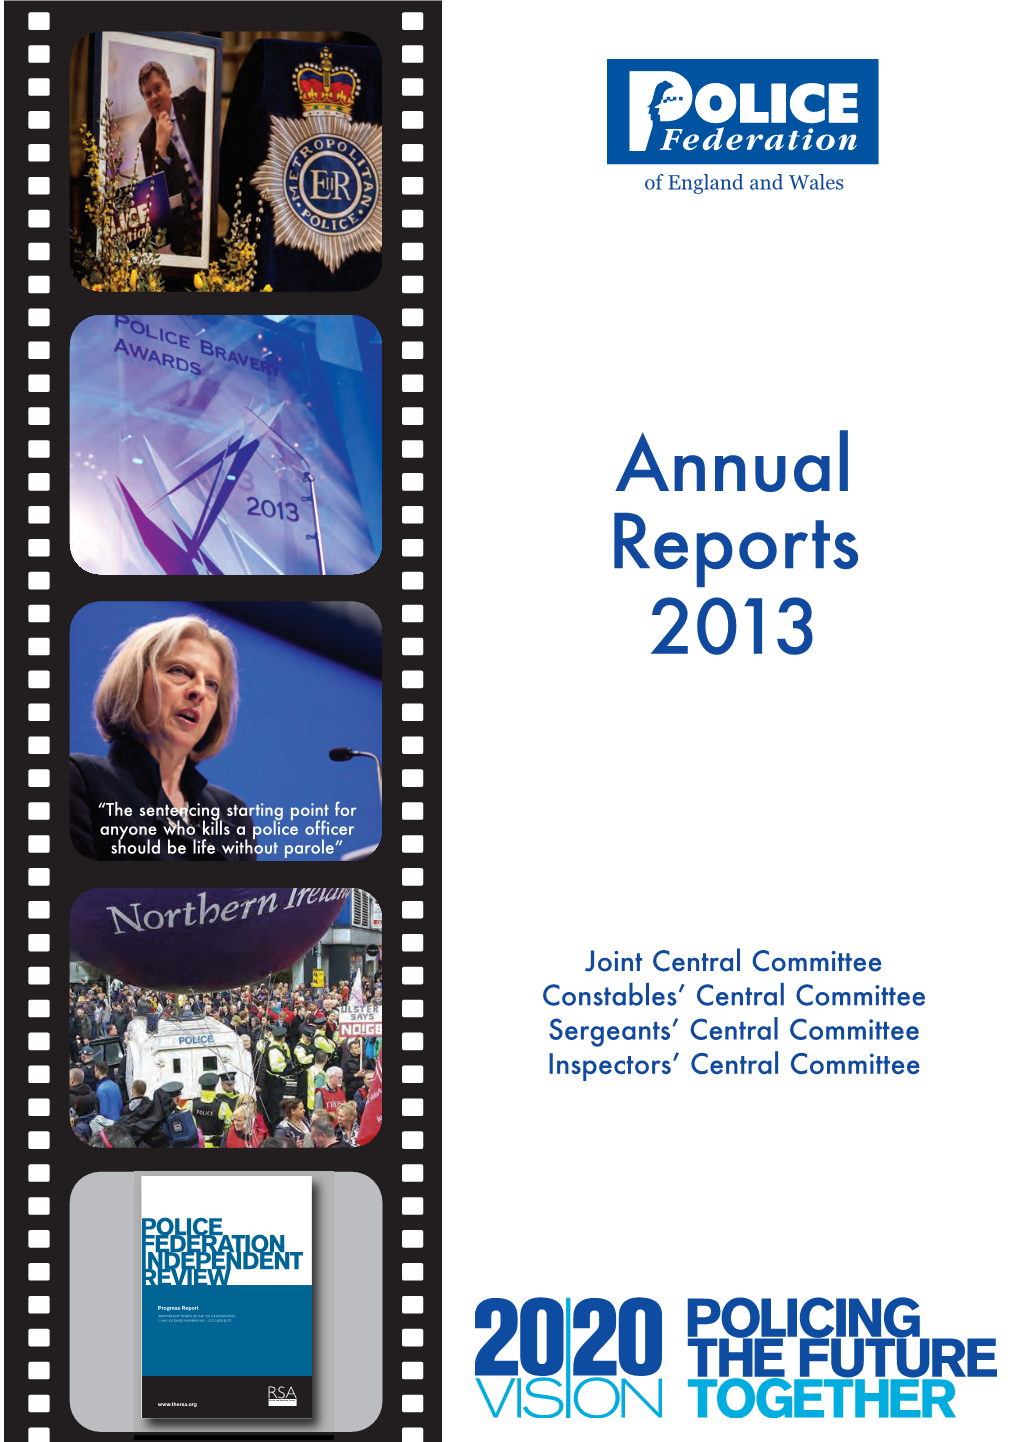 Annual Reports 2013 Reports Annual Federationpolice Reports 2013